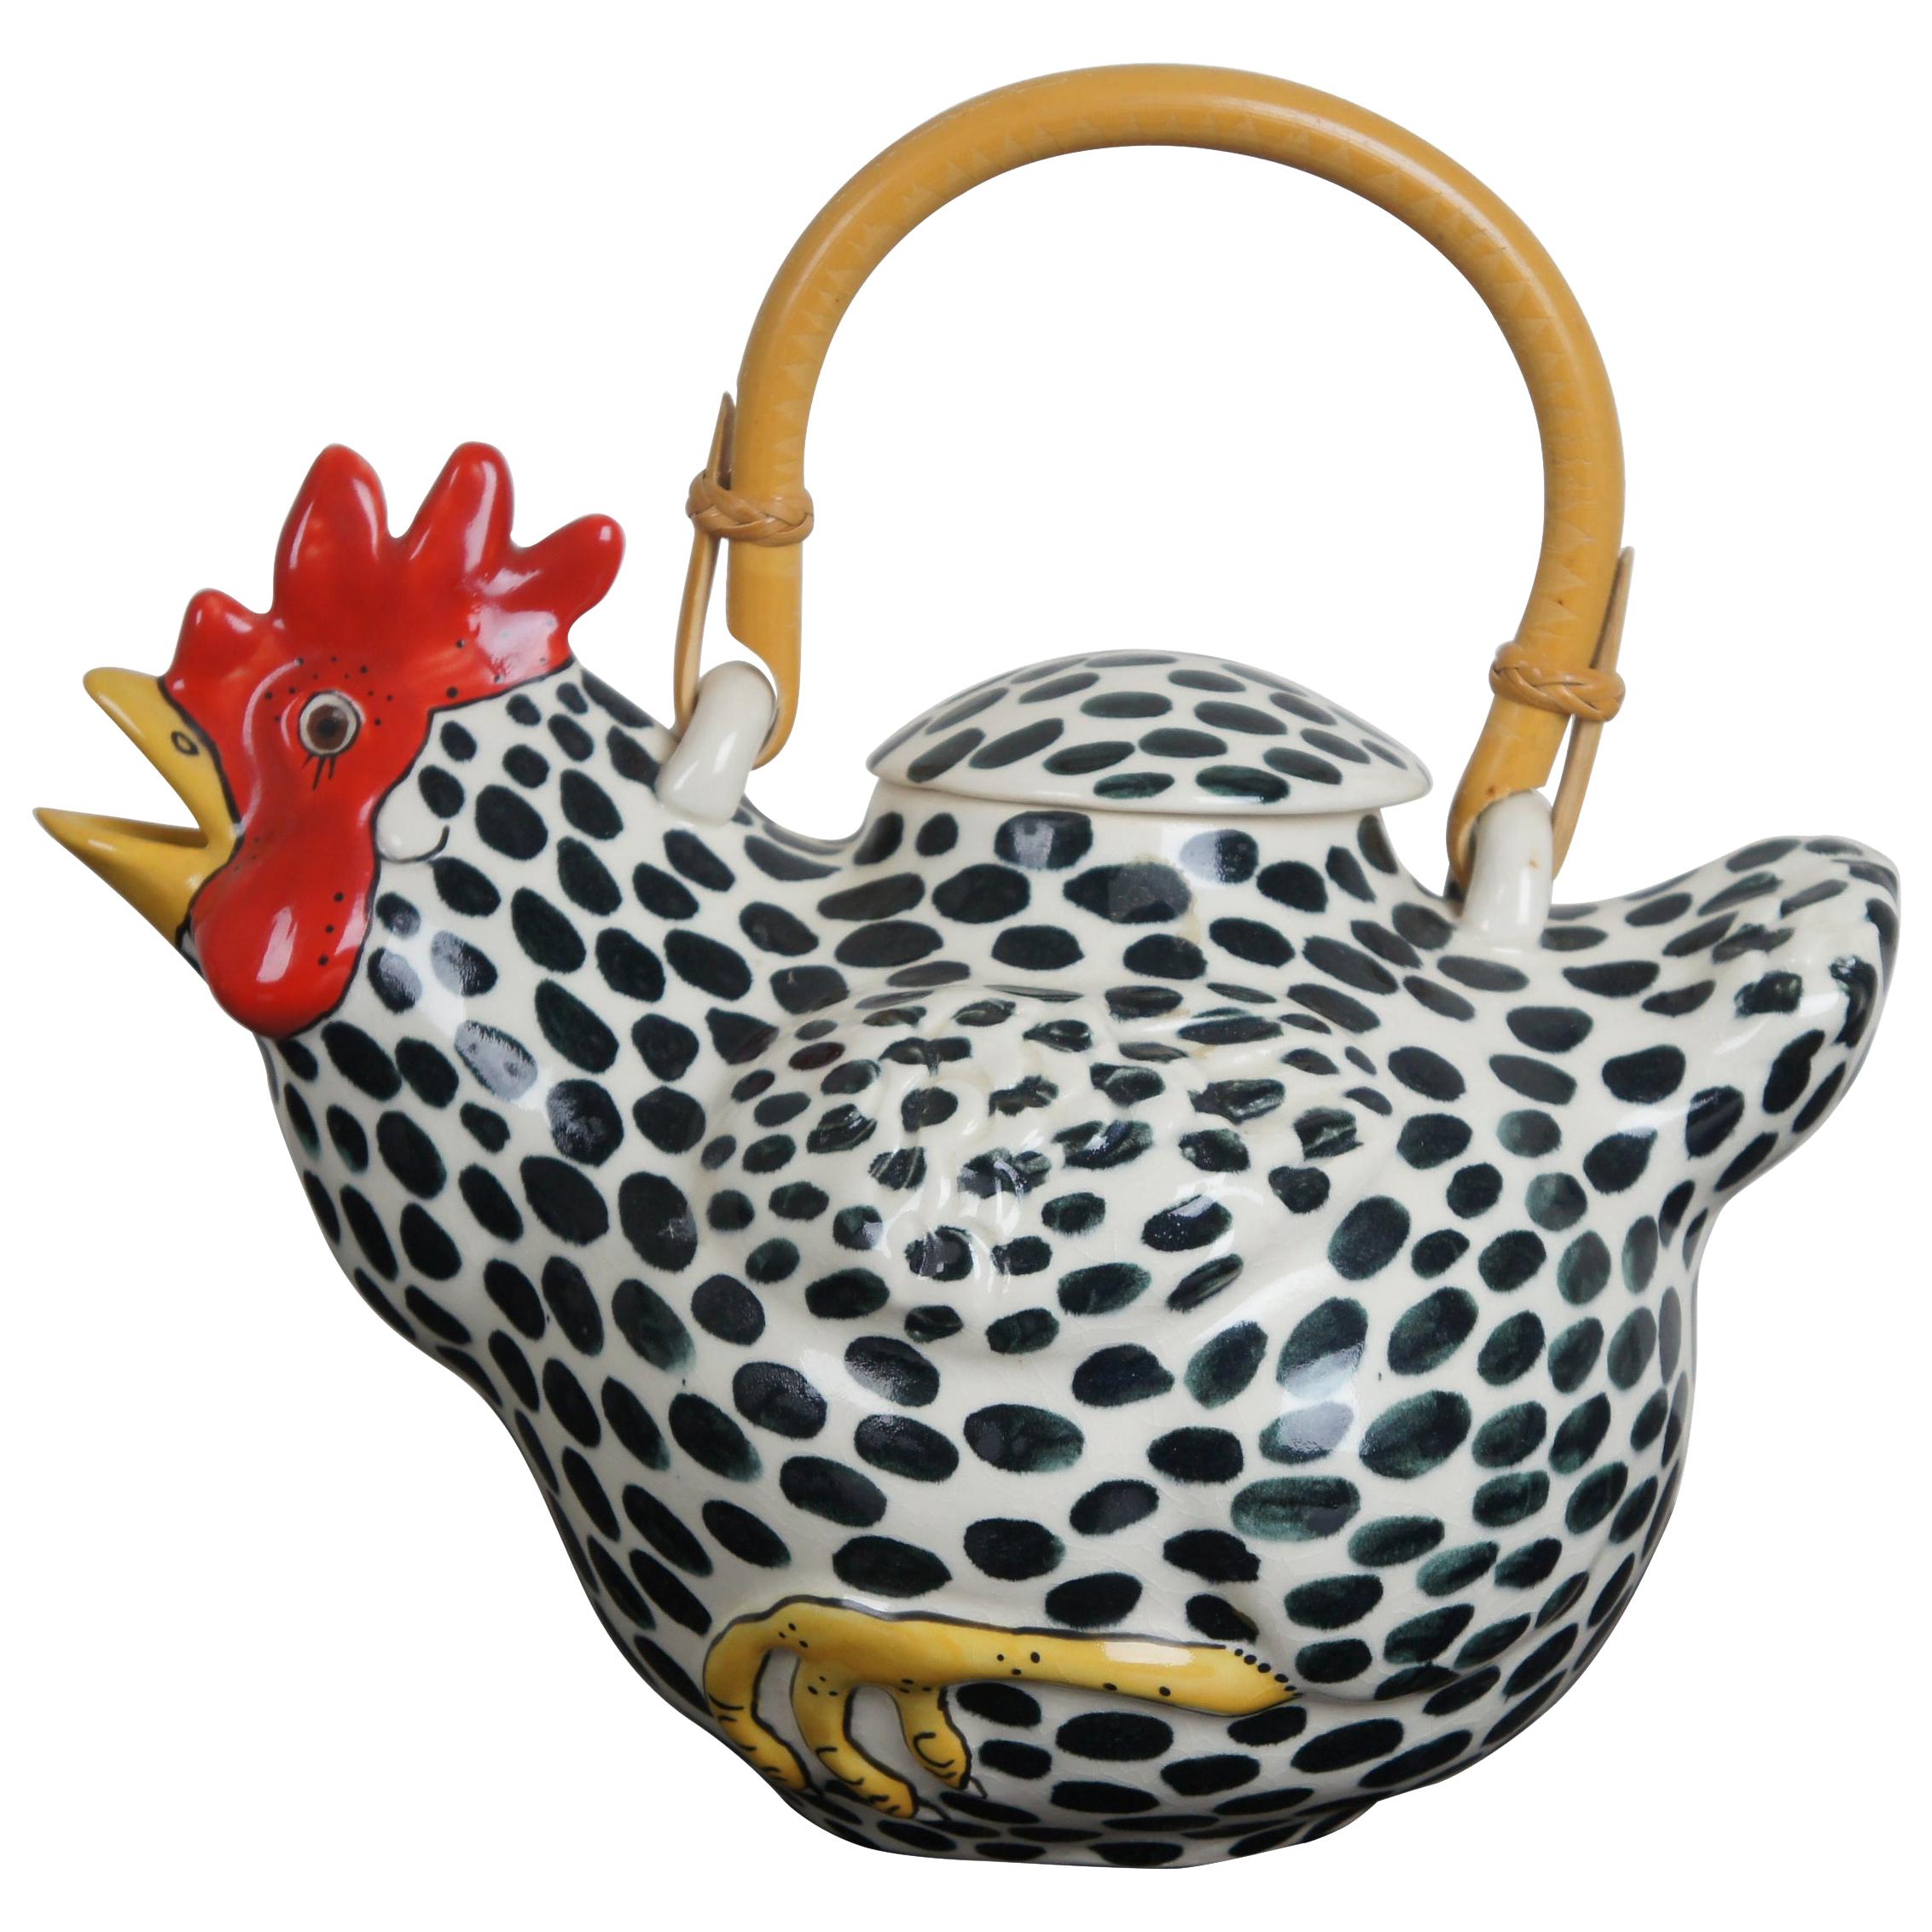 https://a.1stdibscdn.com/animals-co-ceramic-spotted-hen-rooster-chicken-teapot-with-bamboo-handle-608-for-sale/1121189/f_216886121608665692985/21688612_master.jpg